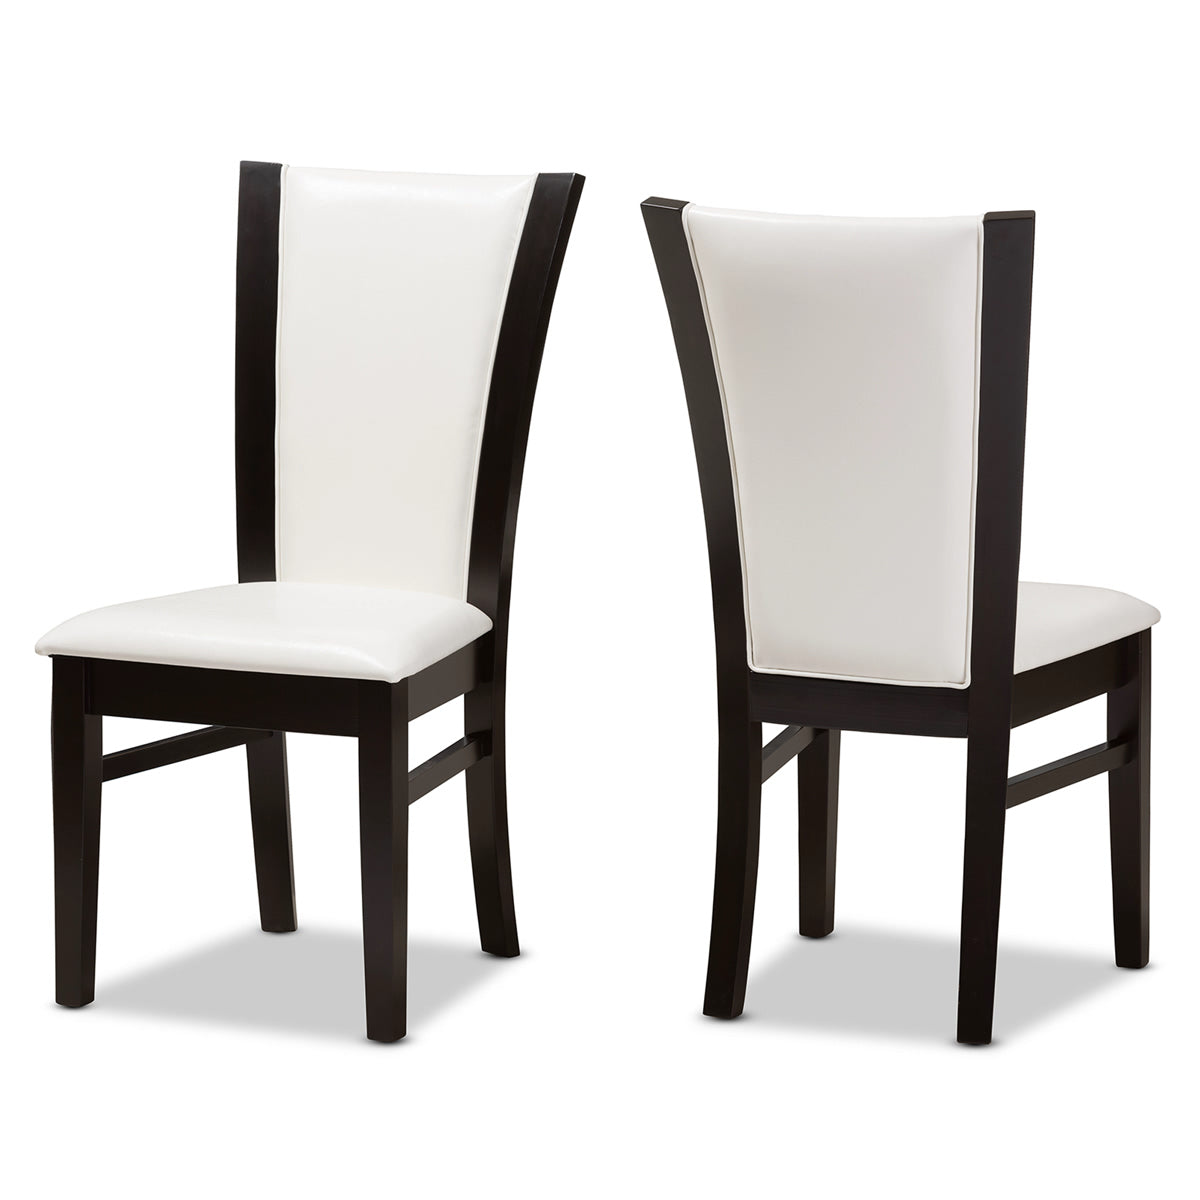 Baxton Studio Adley Modern and Contemporary Dark Brown Finished White Faux Leather Dining Chair (Set of 2) Baxton Studio-dining chair-Minimal And Modern - 1